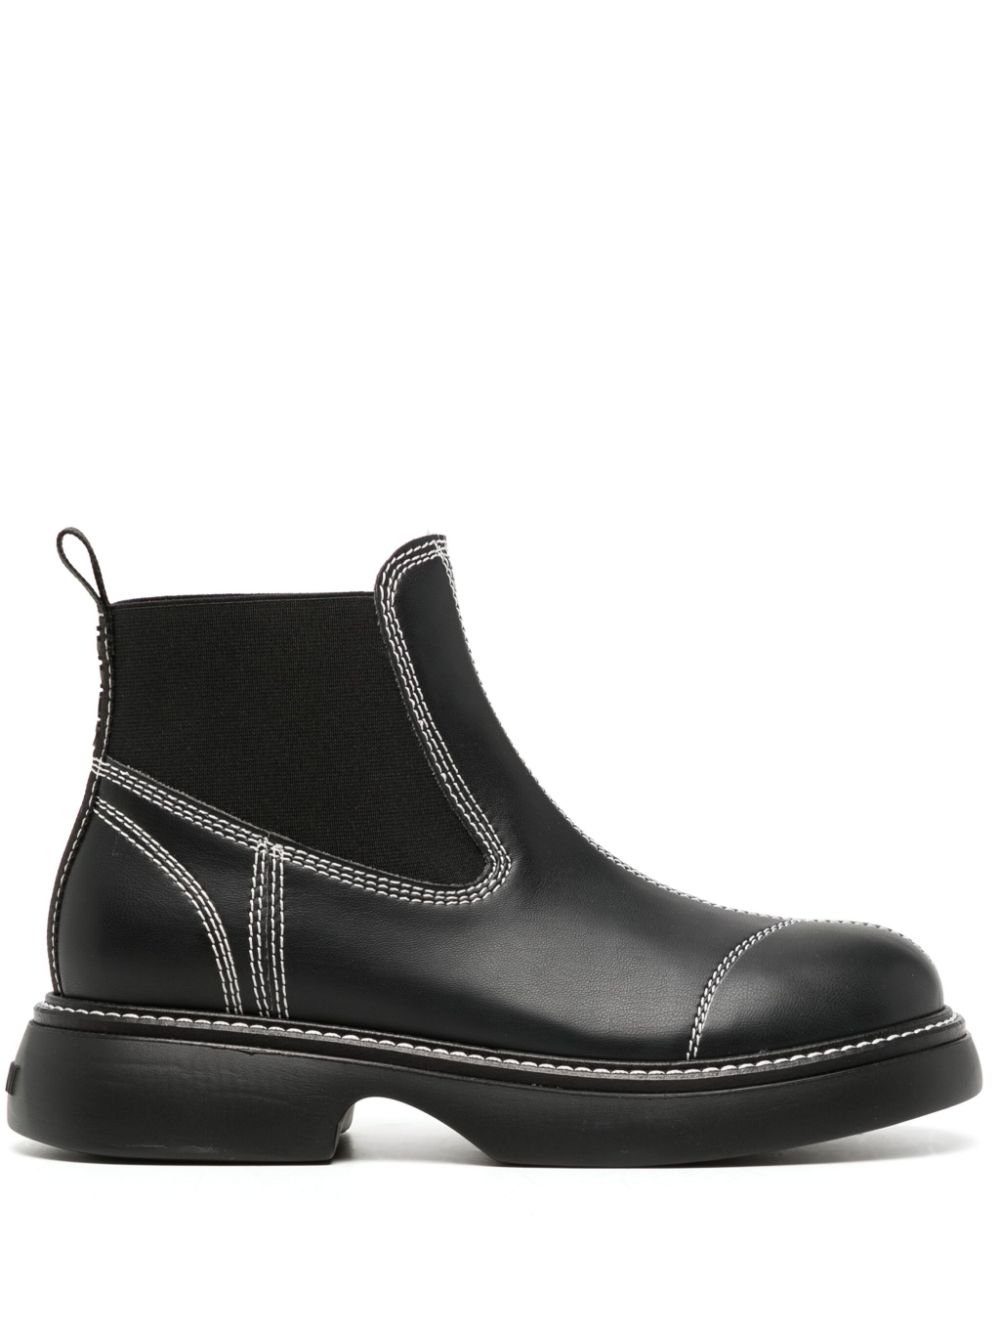 GANNI contrast-stitching leather boots - Black